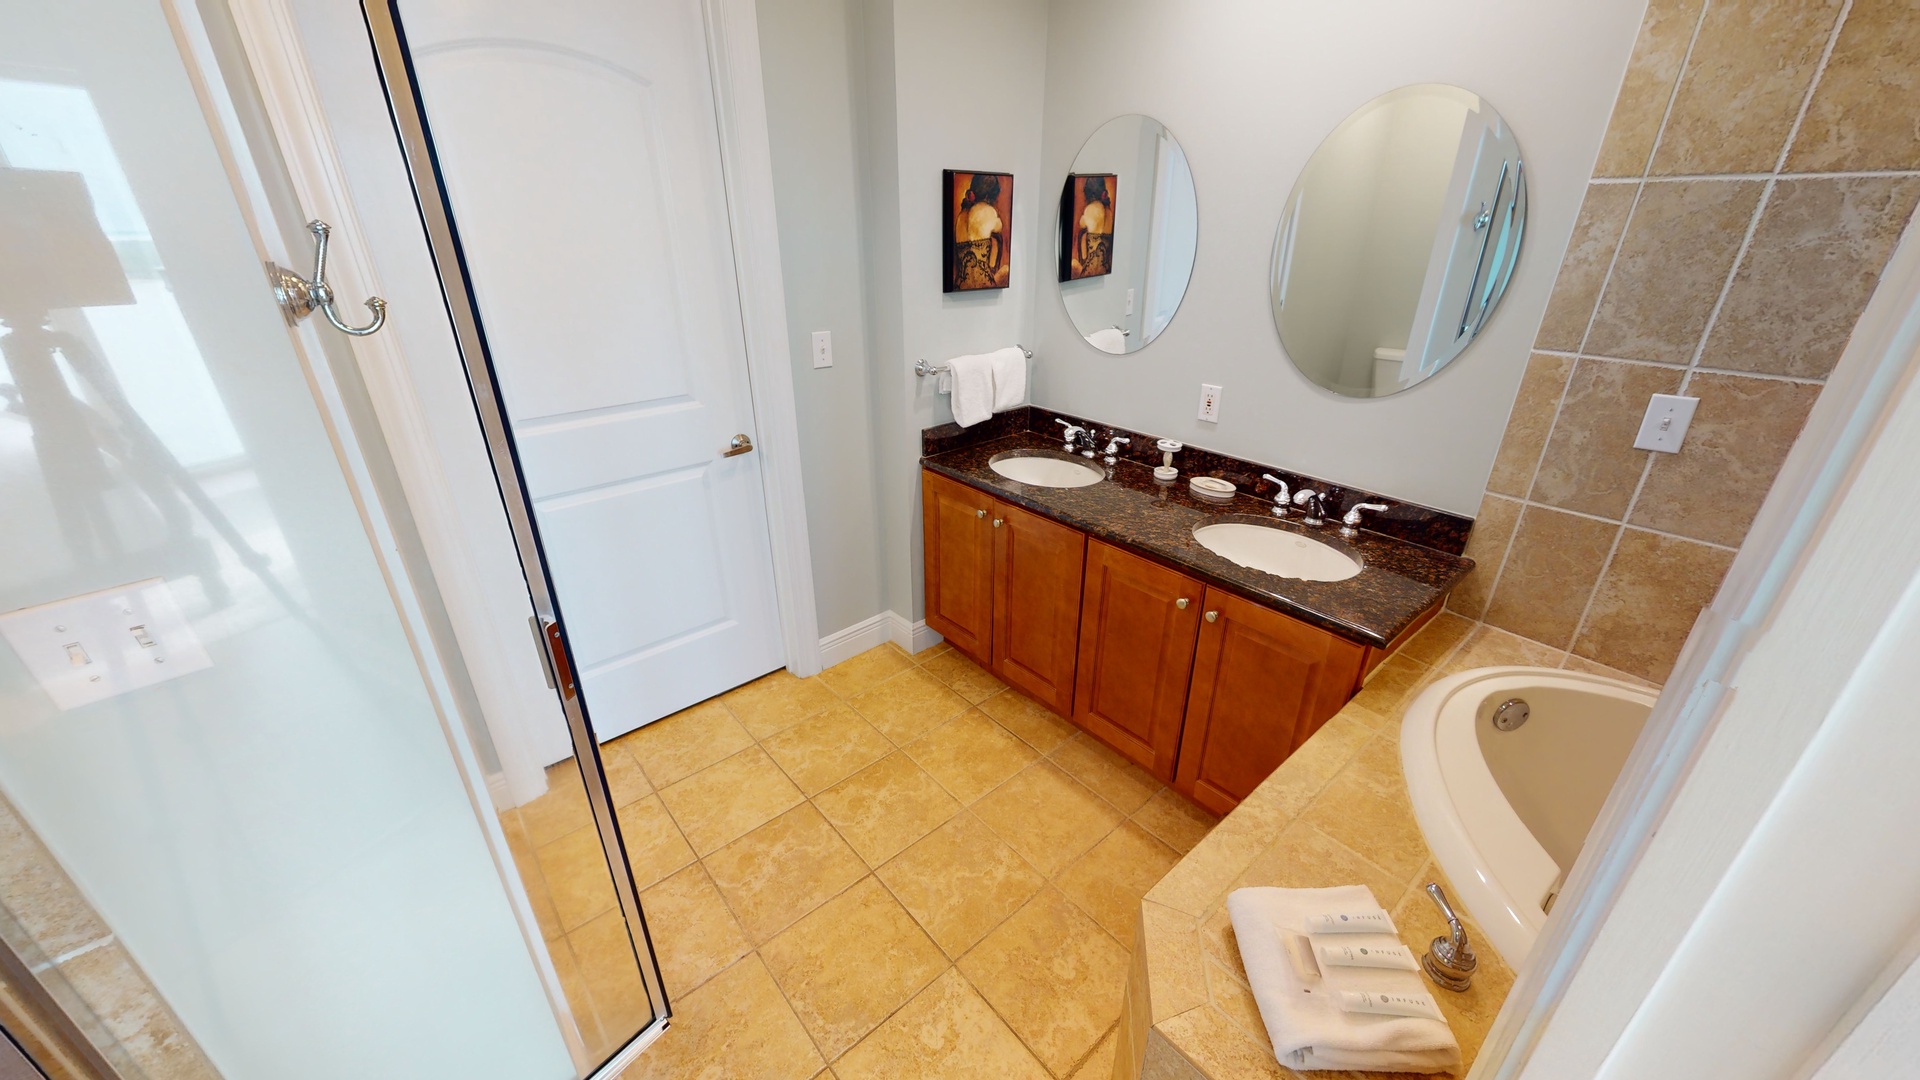 The bathroom in bedroom 2 has a double vanity and a walk-in shower